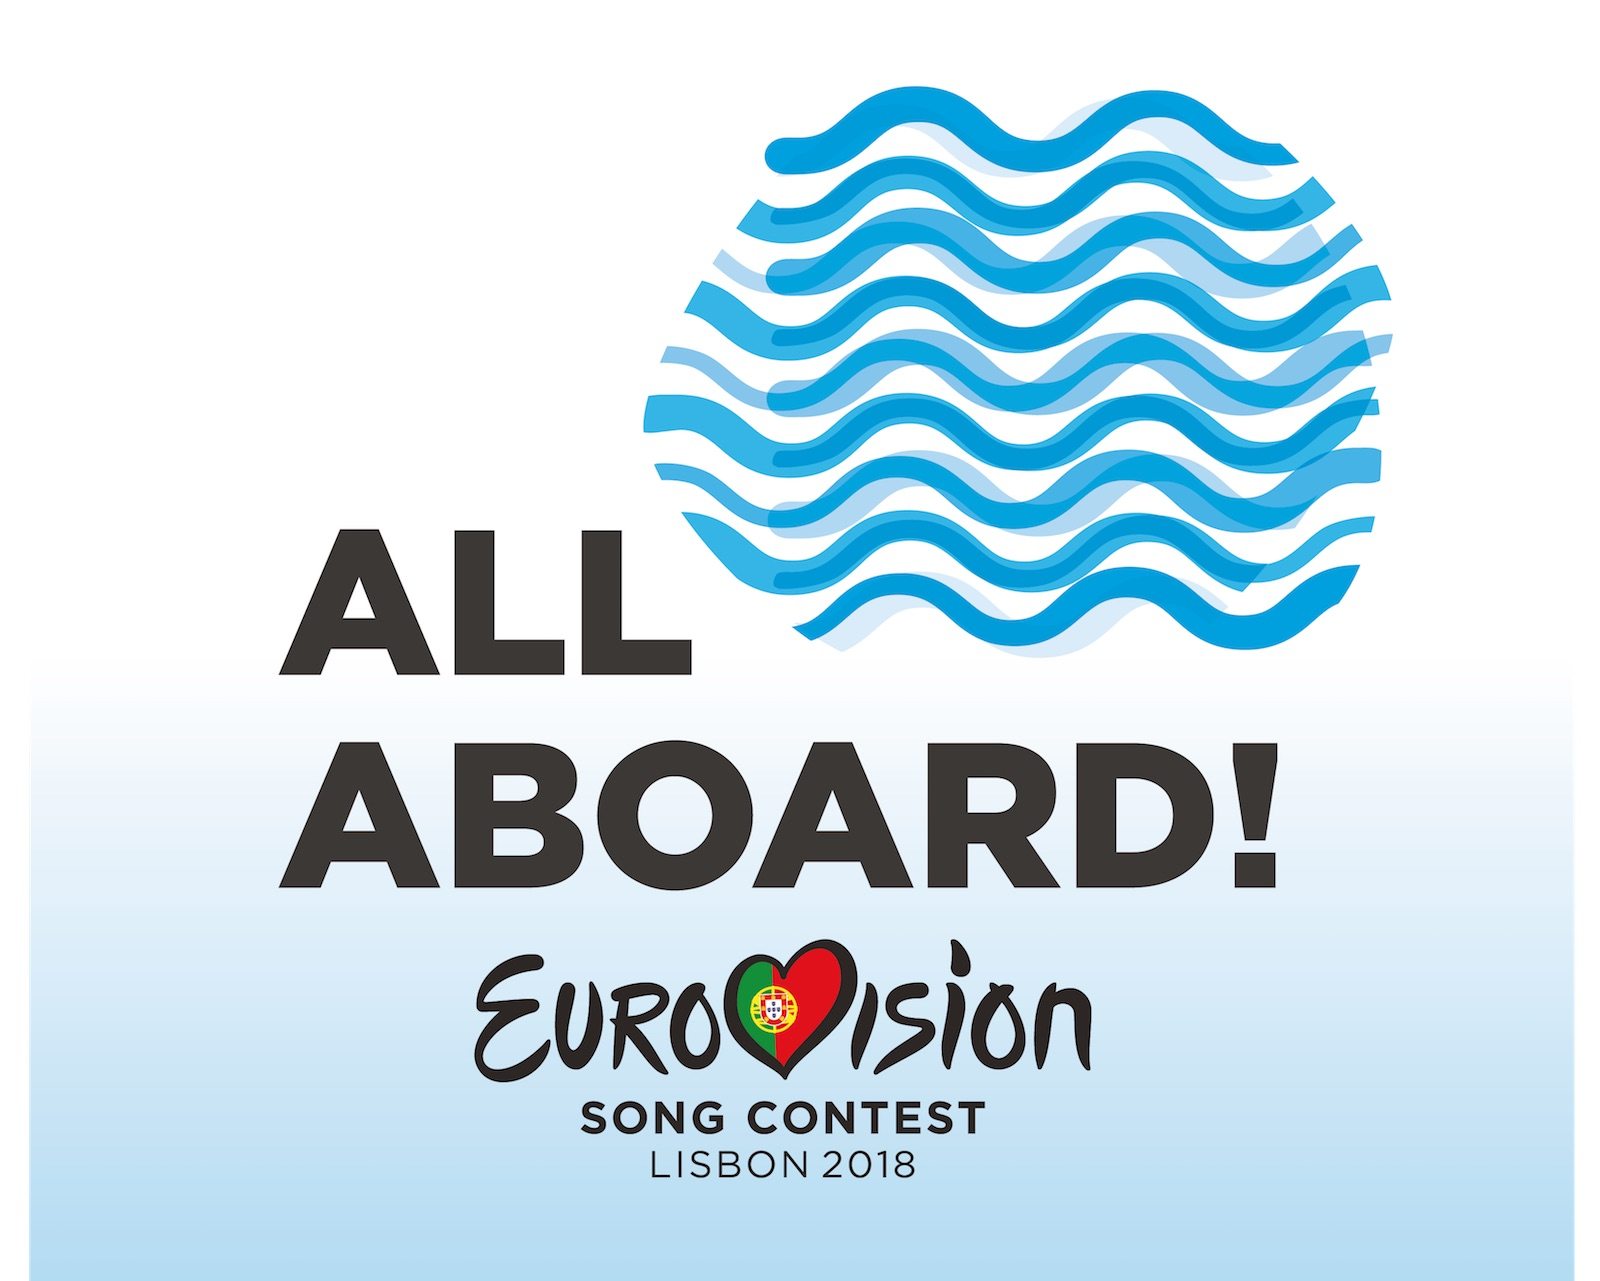 Watch Eurovision Song Contest 2018 live stream PinkNews